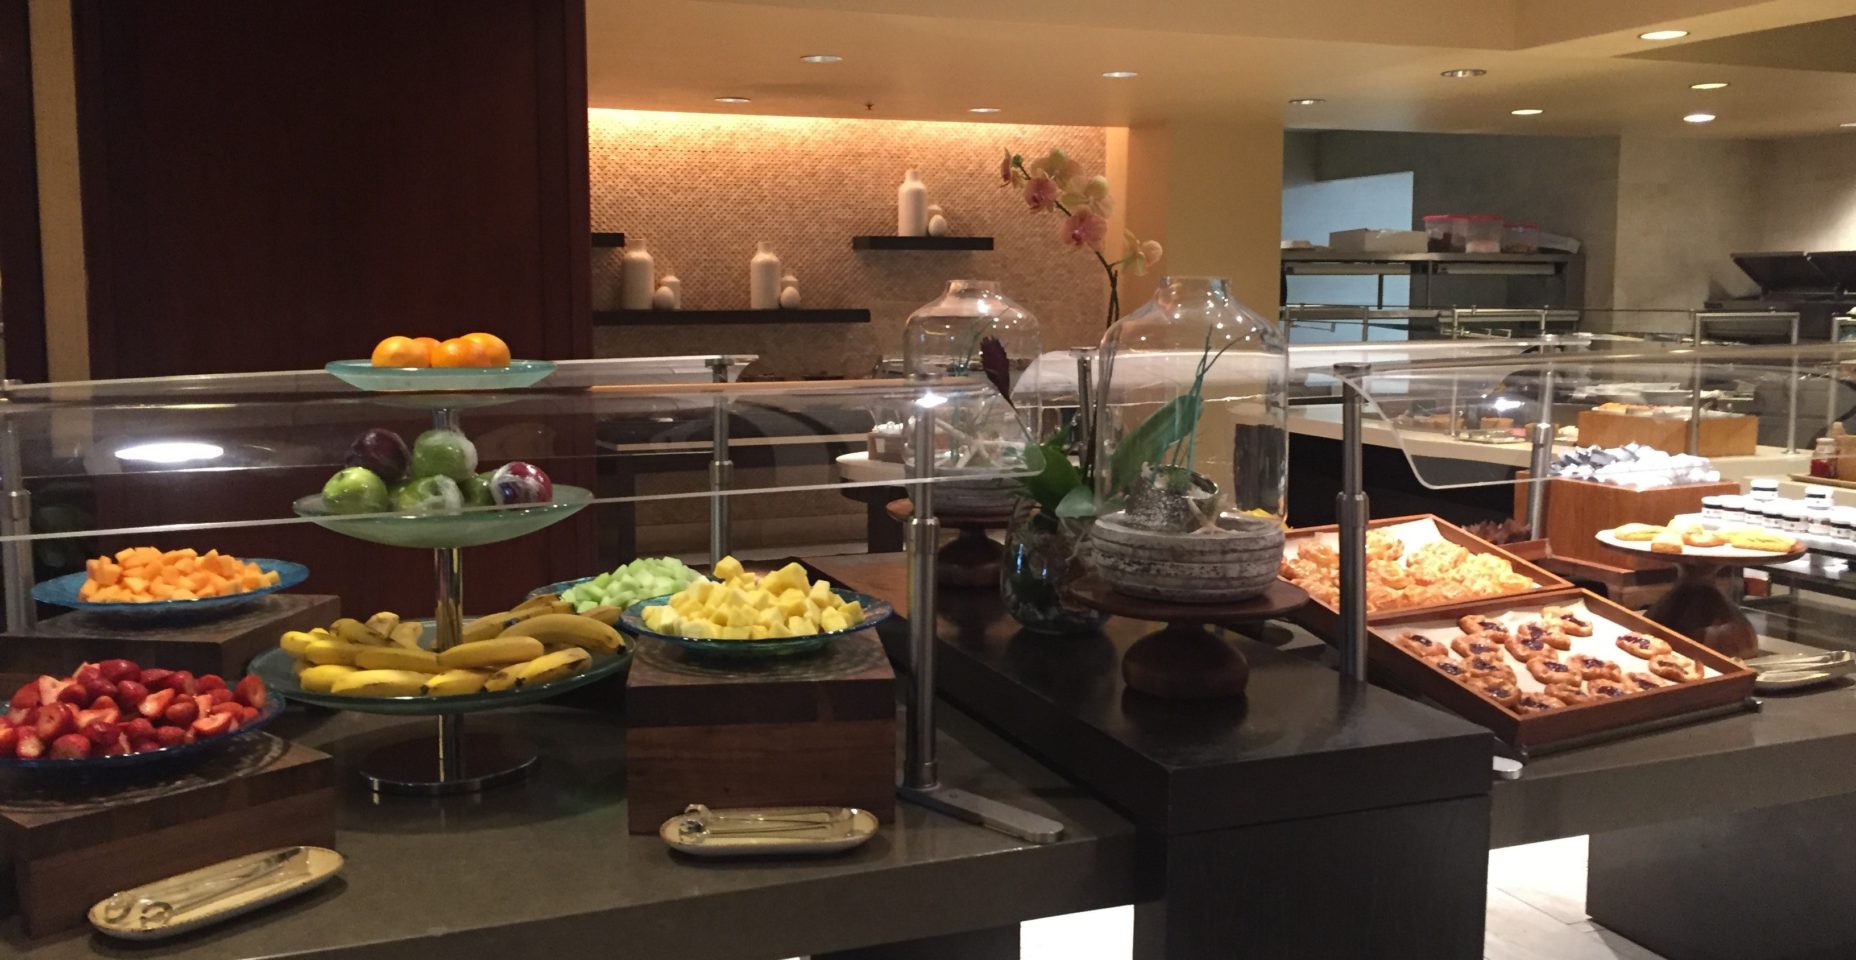 A Full Breakfast Buffet or a la carte Table Service at the Tanglewood Restaurant of the Hyatt Regency Coconut Point ~ Gem of a Florida Resort